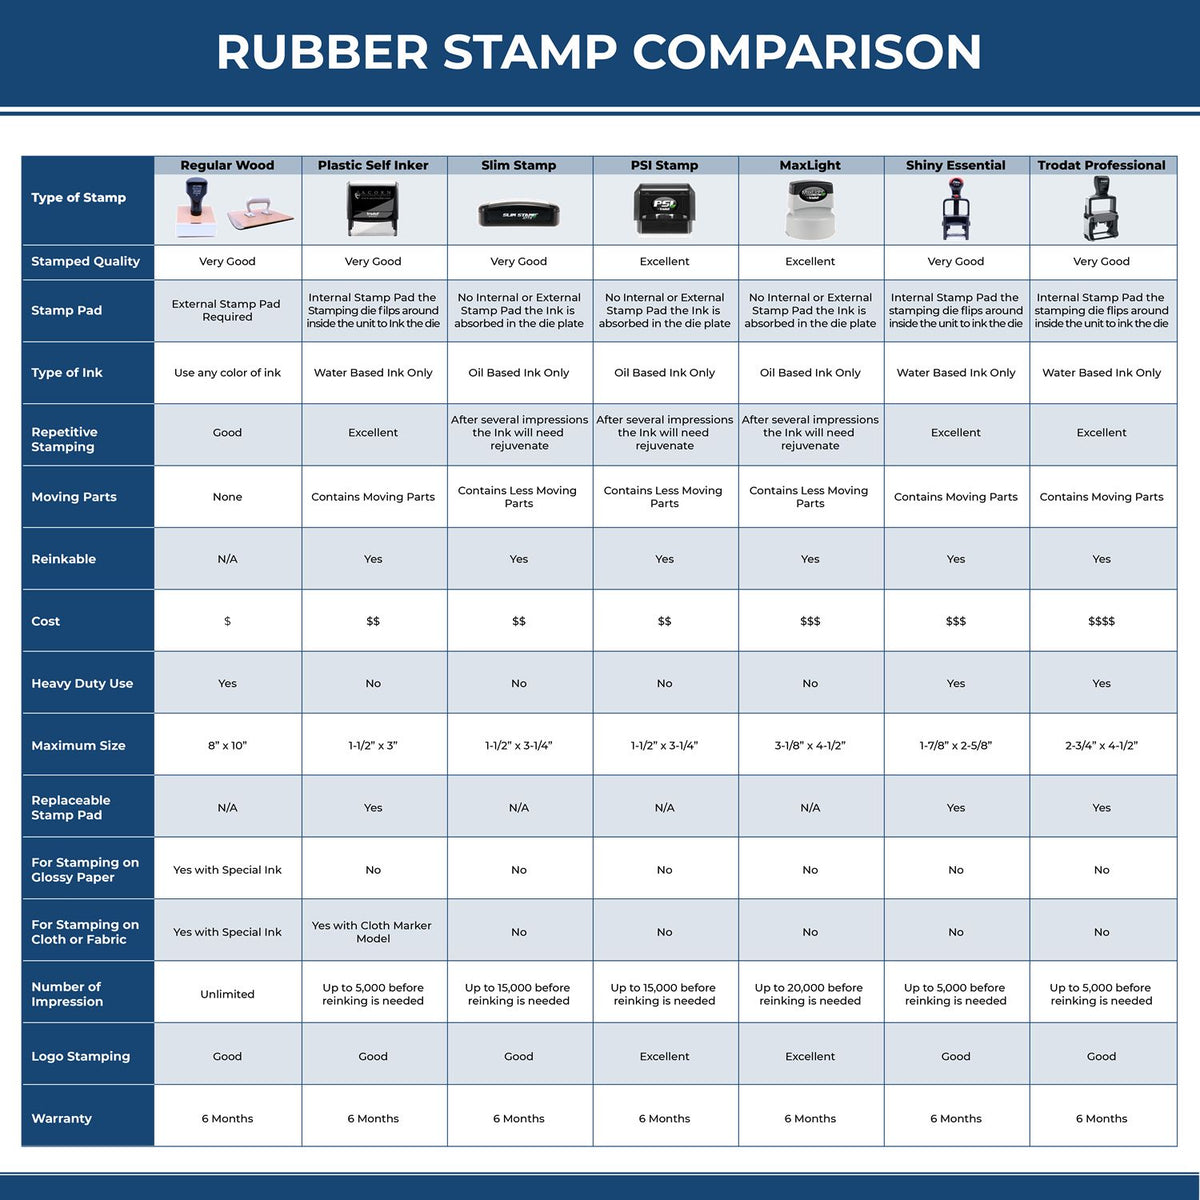 A comparison chart for the different types of mount models available for the Premium MaxLight Pre-Inked Tennessee Engineering Stamp.